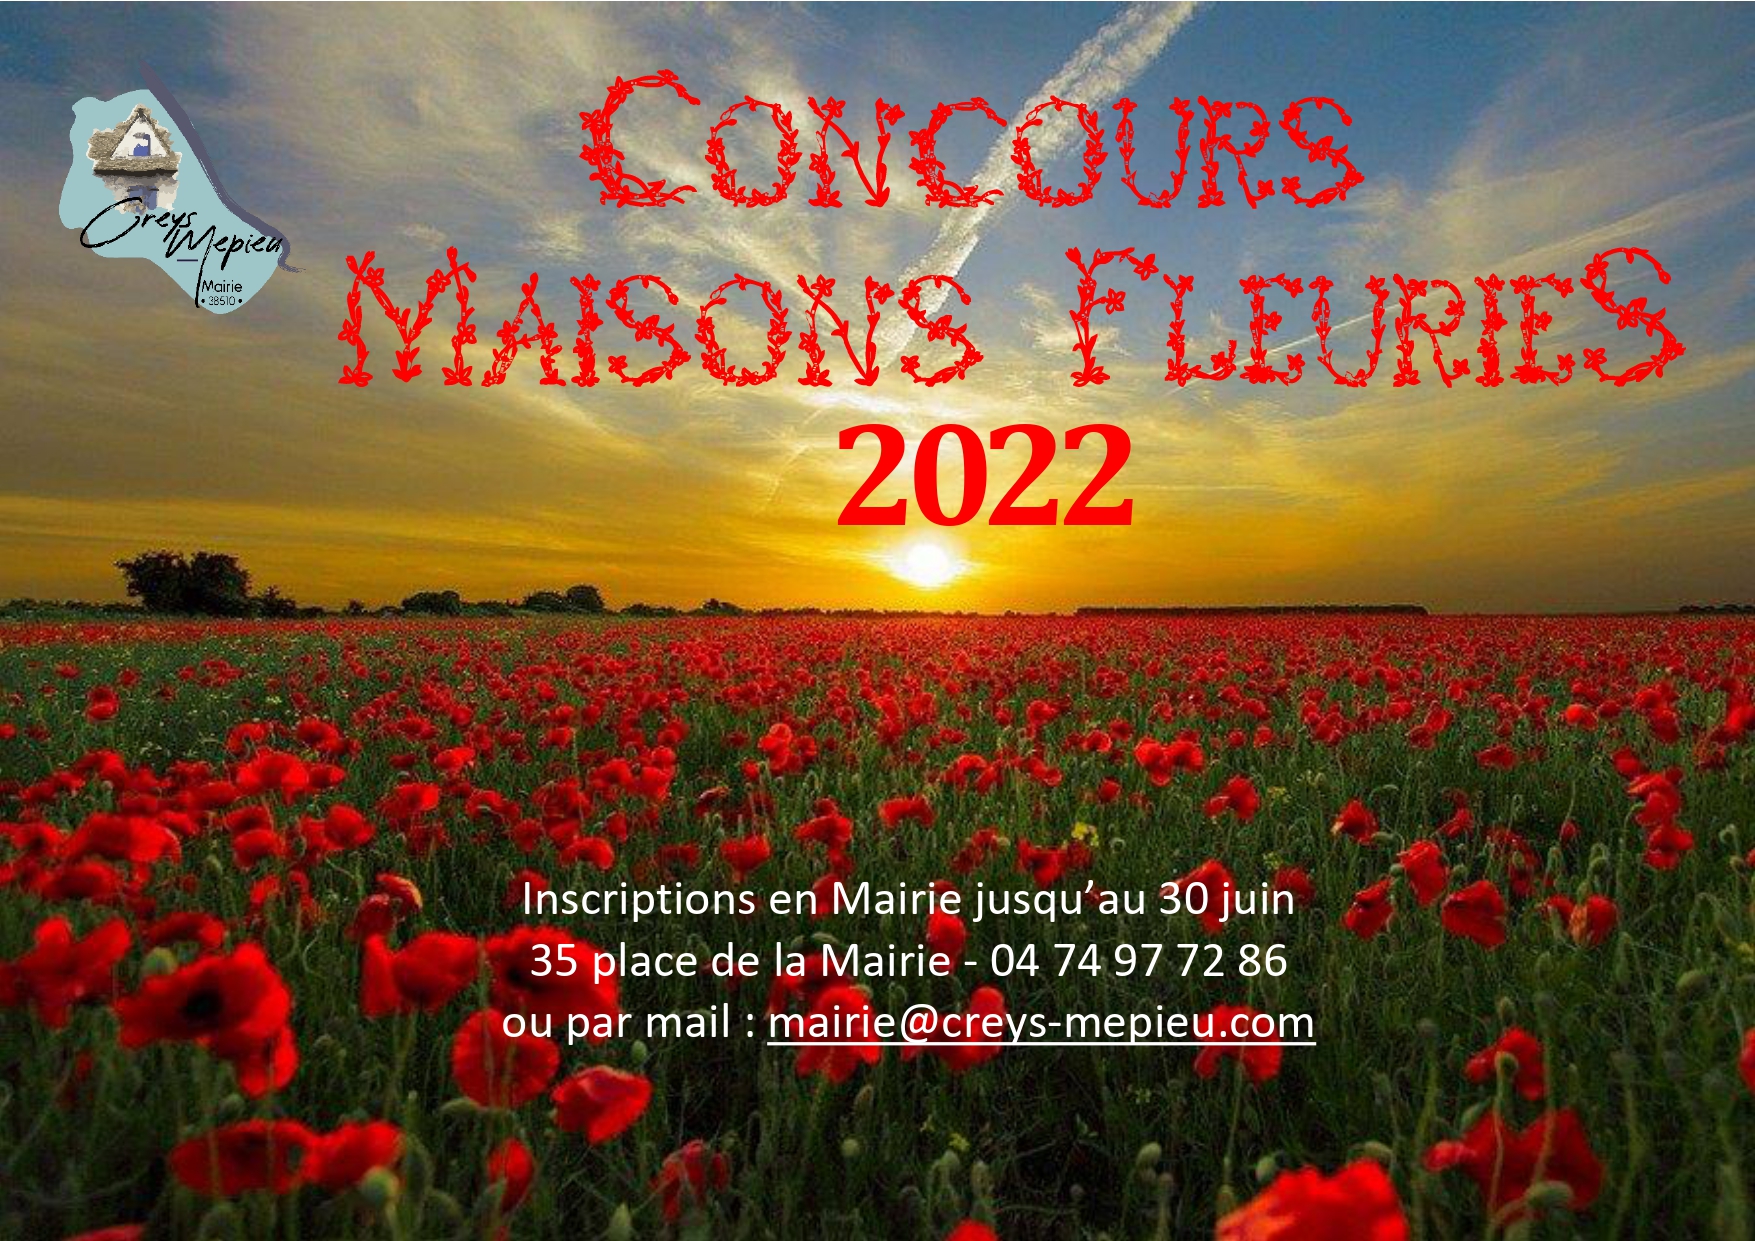 Affiche maisons fleuries 2022_pages-to-jpg-0001.jpg